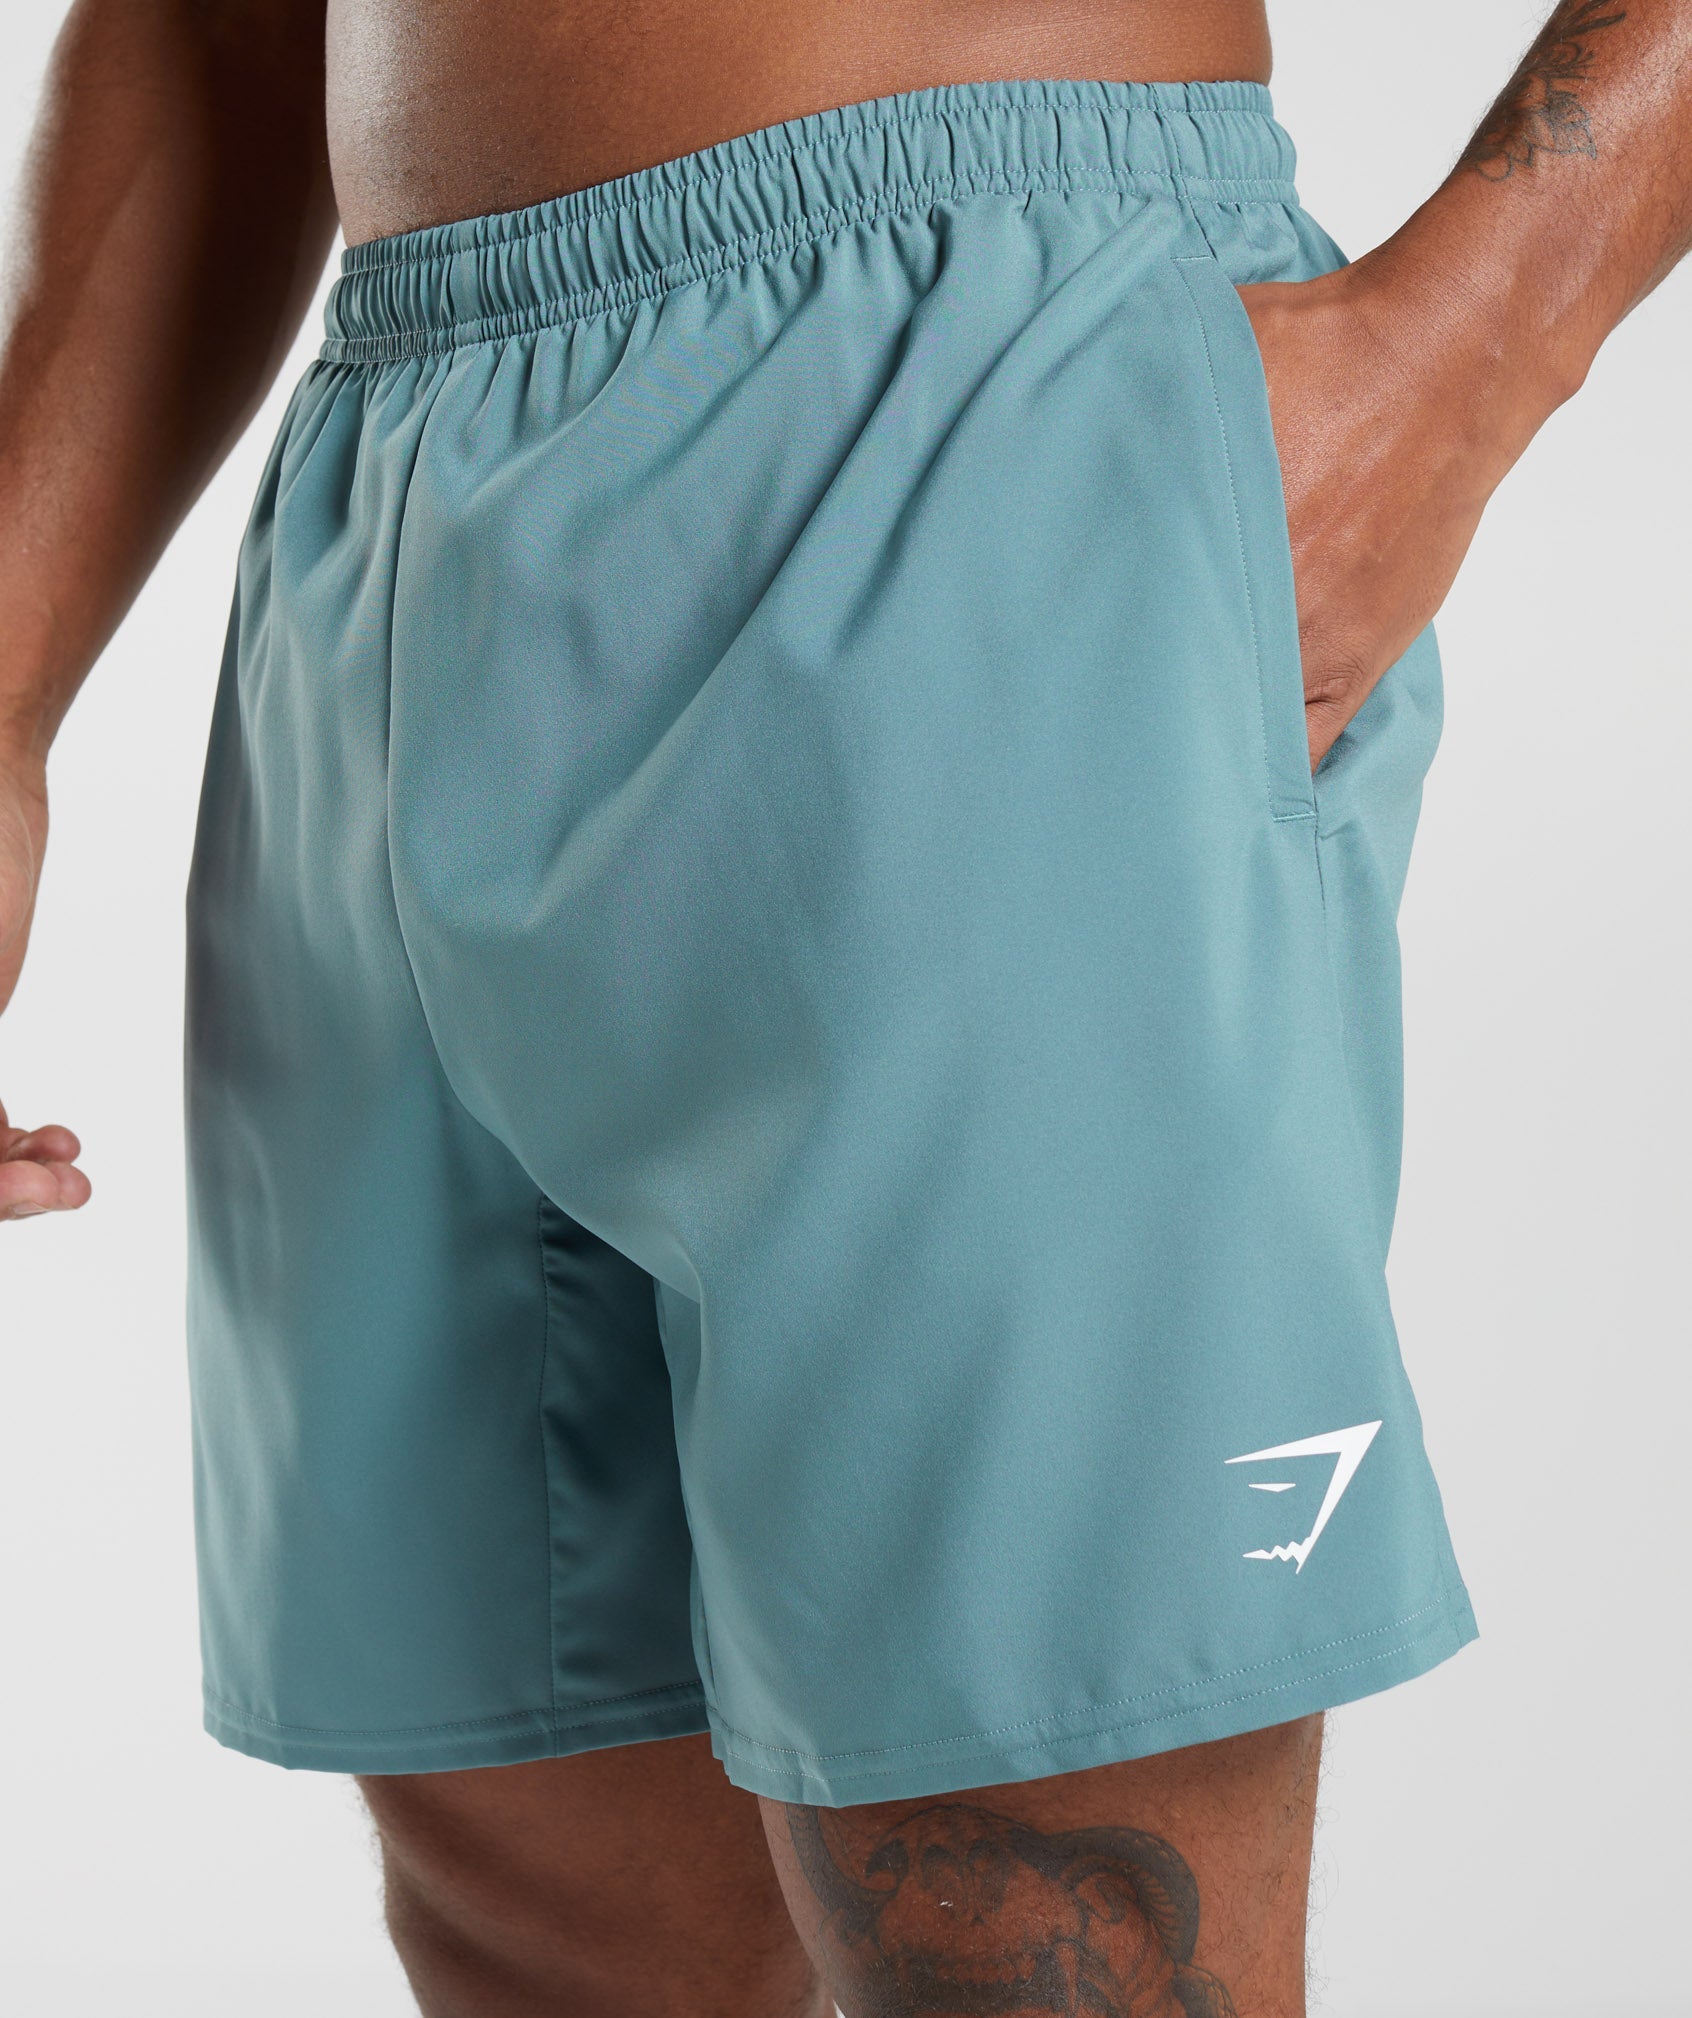 Arrival 7" Shorts in Thunder Blue